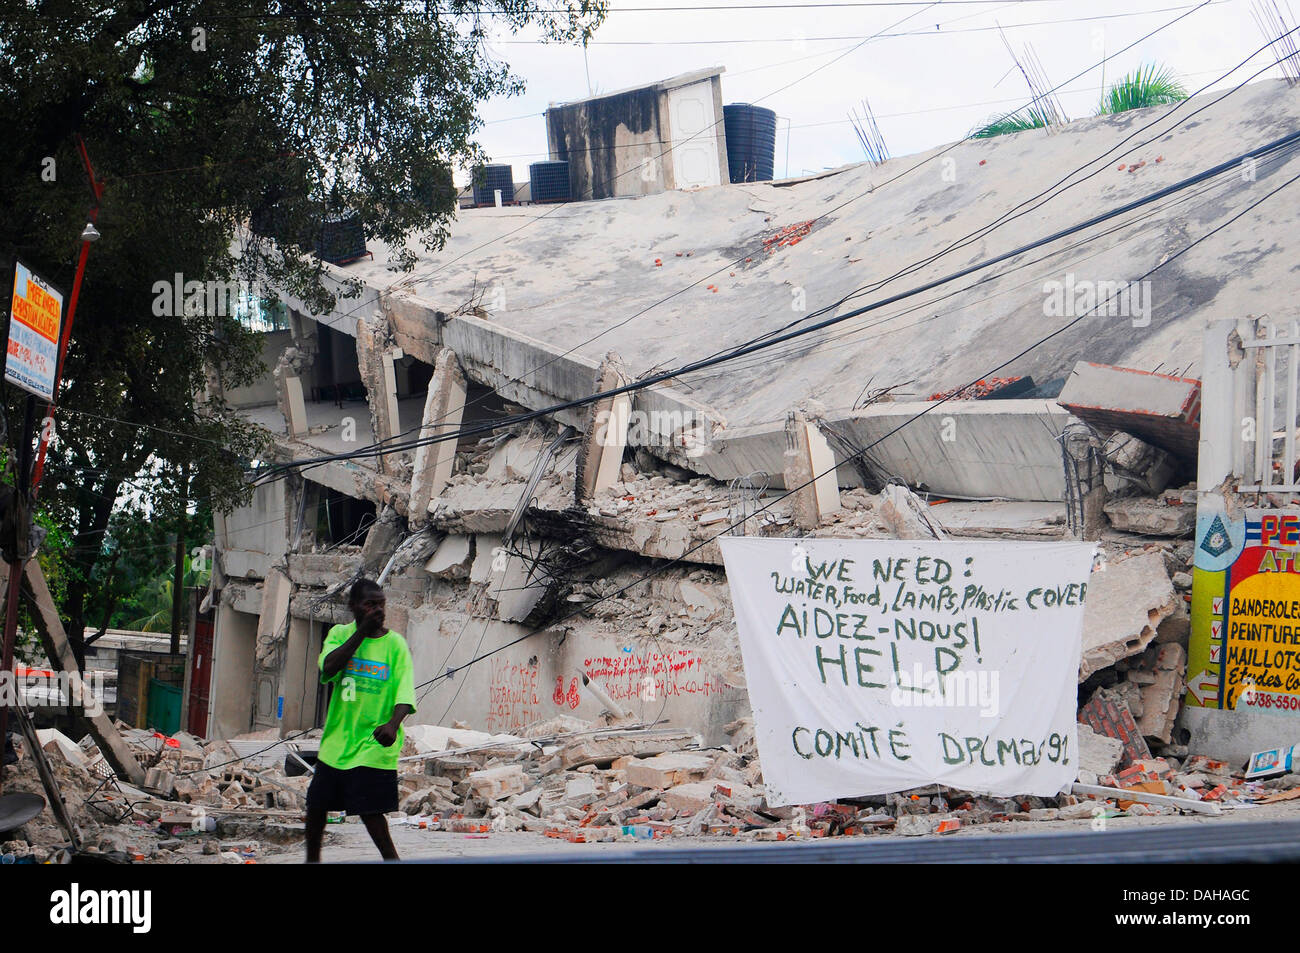 A Haitian man walks past a sign requesting help and supplies in the aftermath of a 7.0 magnitude earthquake that killed 220,000 people January 18, 2010 in Port-au-Prince, Haiti. Stock Photo